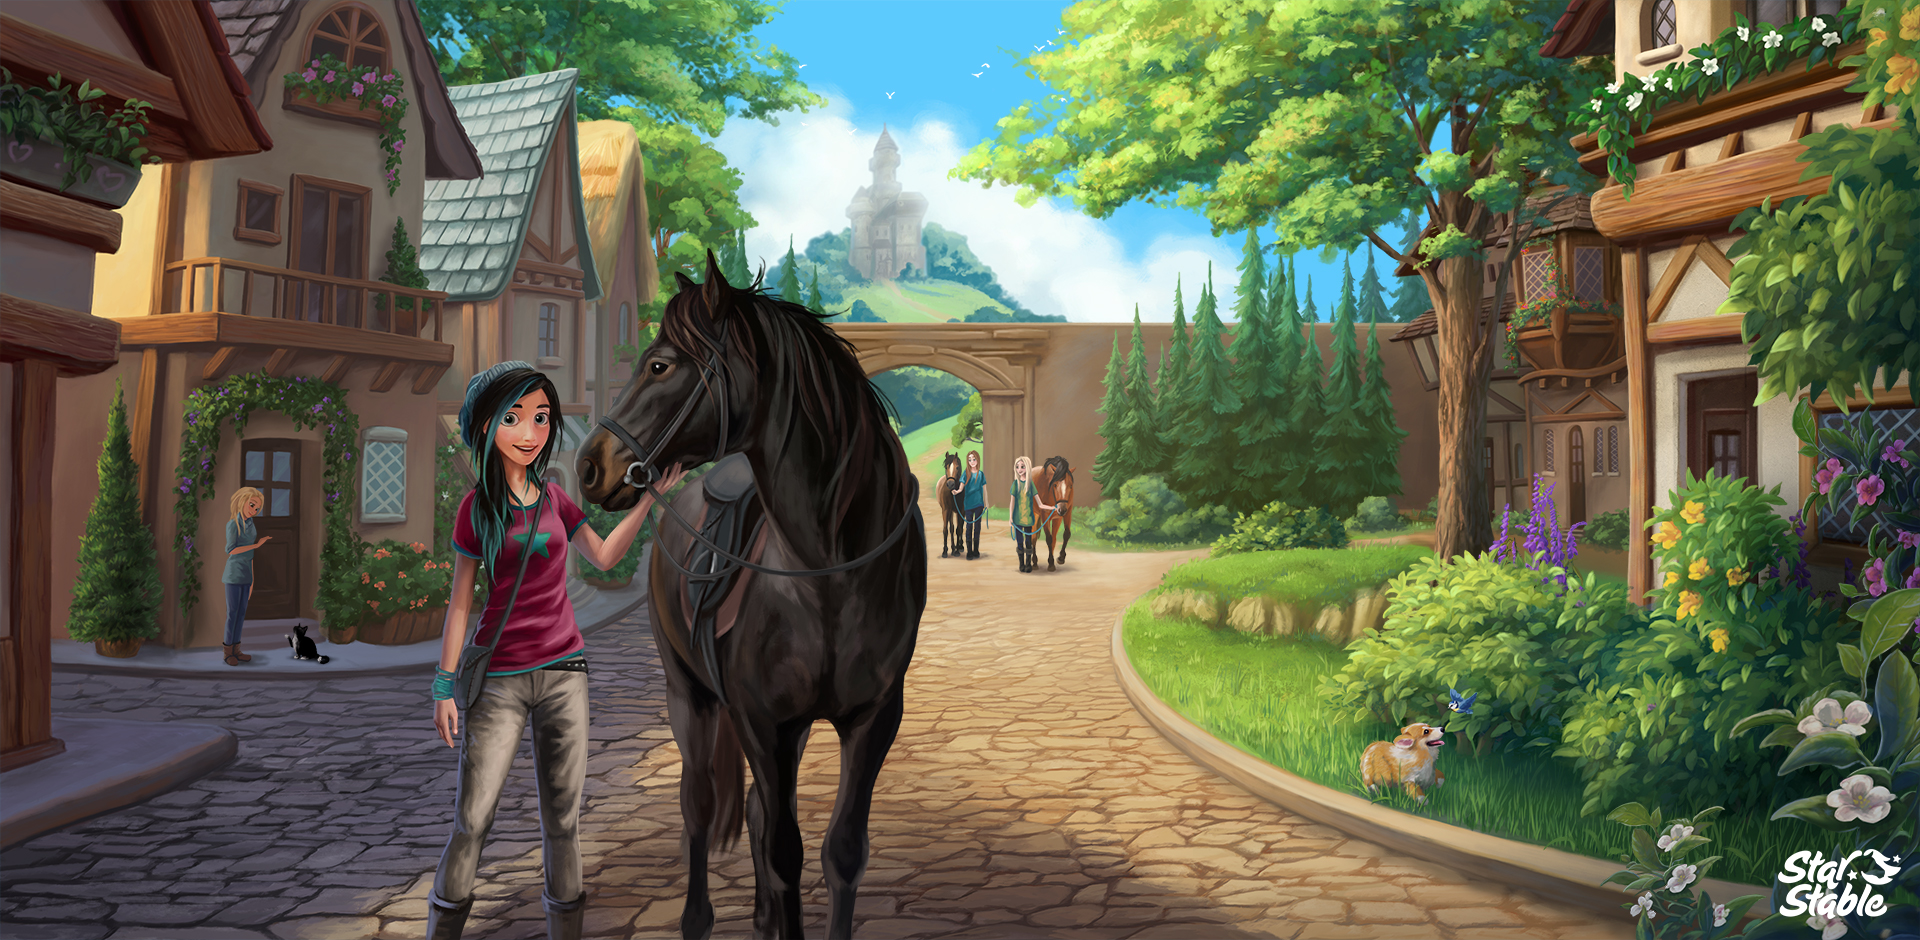 Free desktop wallpapers and backgrounds  Star Stable